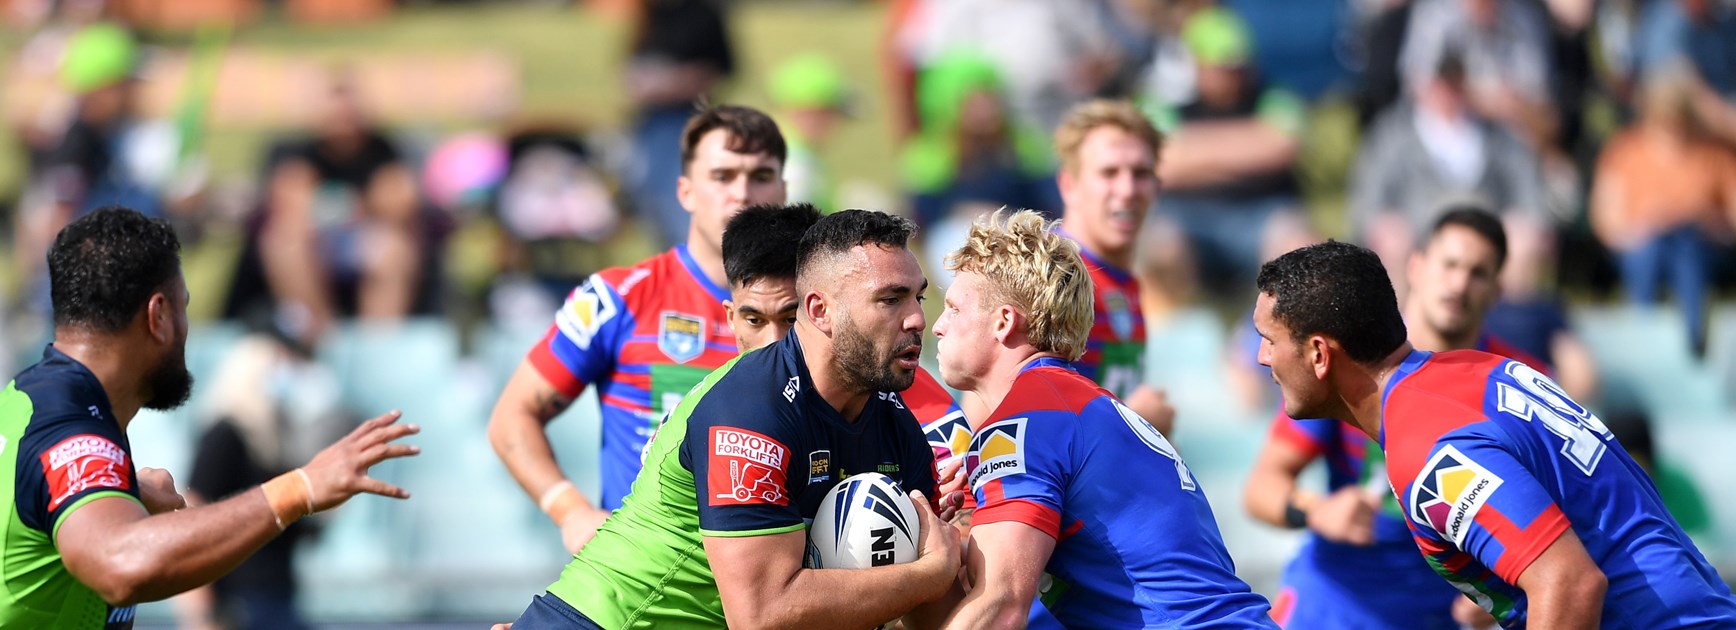 Raiders lose nail-biter in NSW Cup